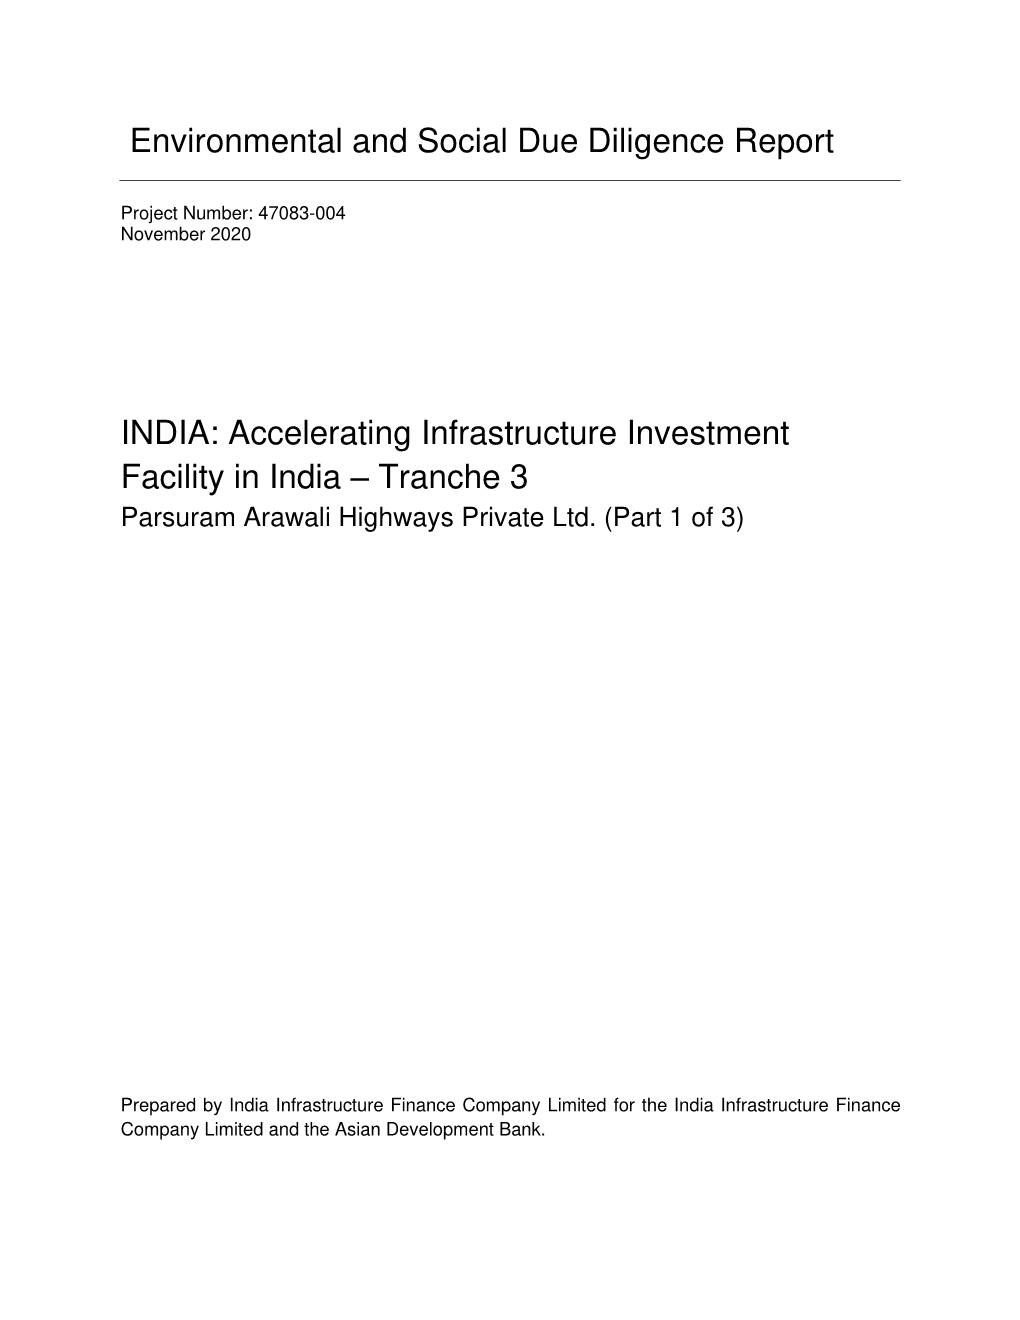 47083-004: Accelerating Infrastructure Investment Facility in India